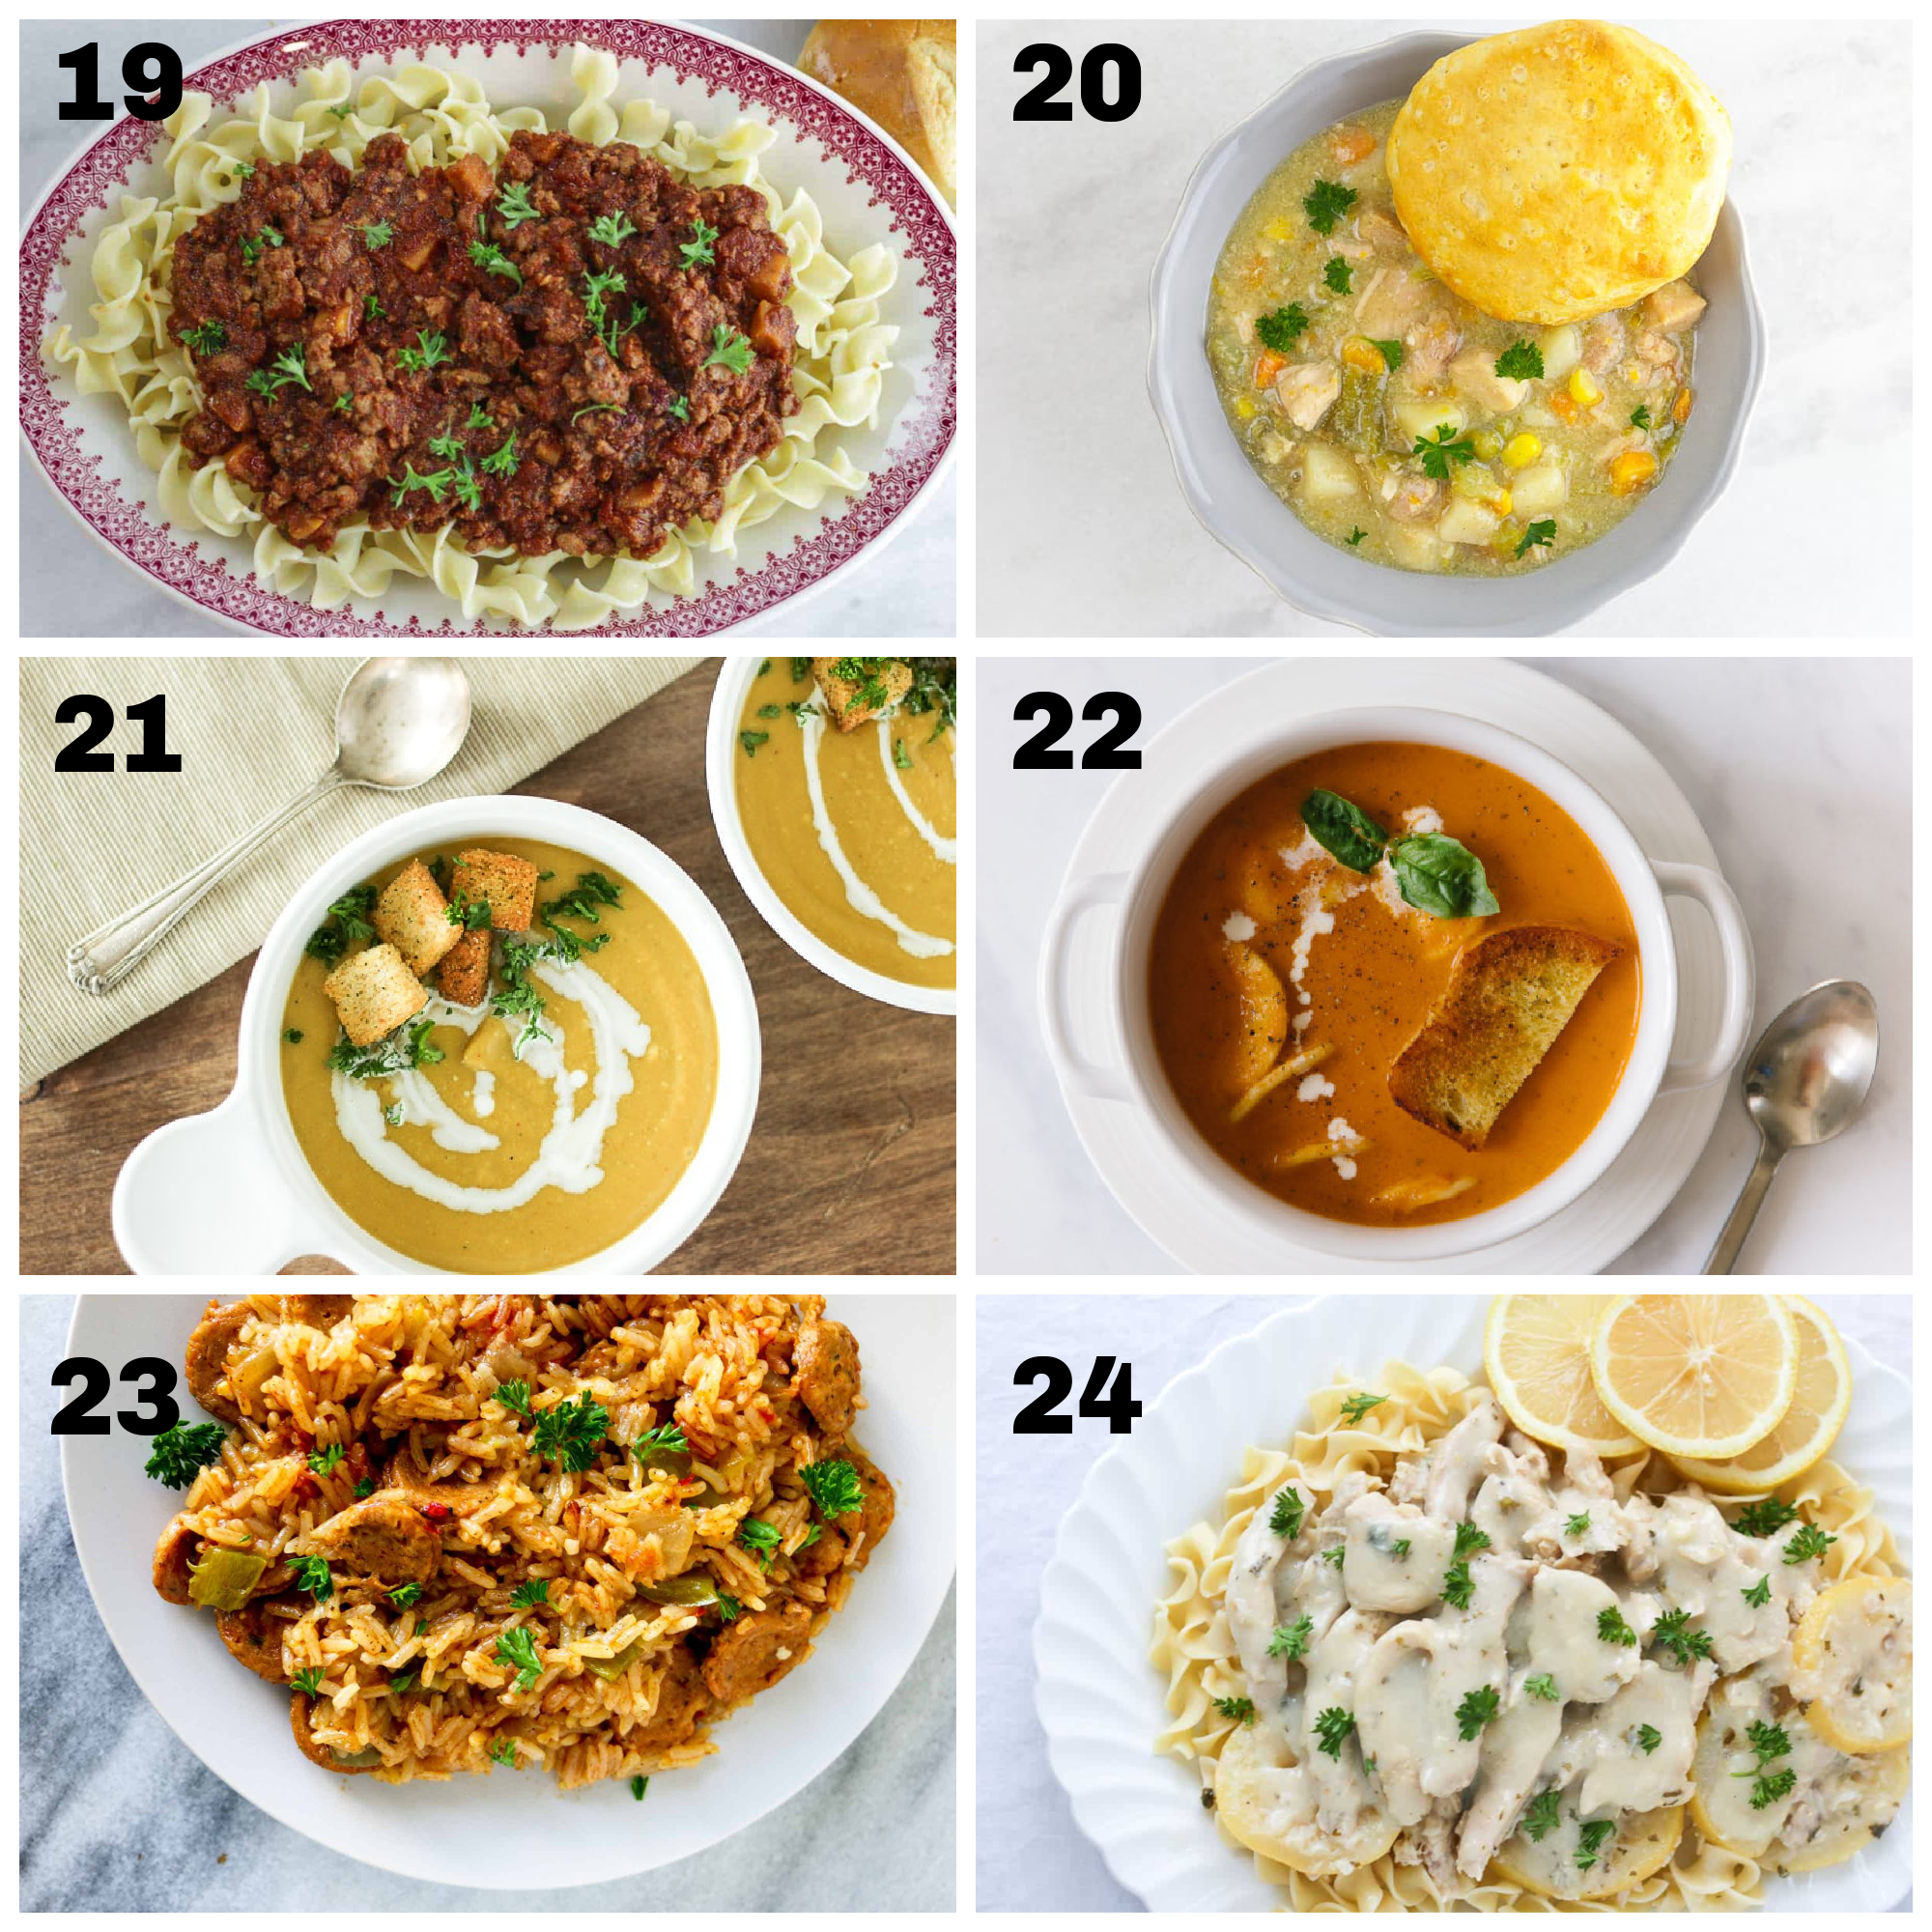 6 completed dinner ideas for instant pot freezer meals labeled 19-24